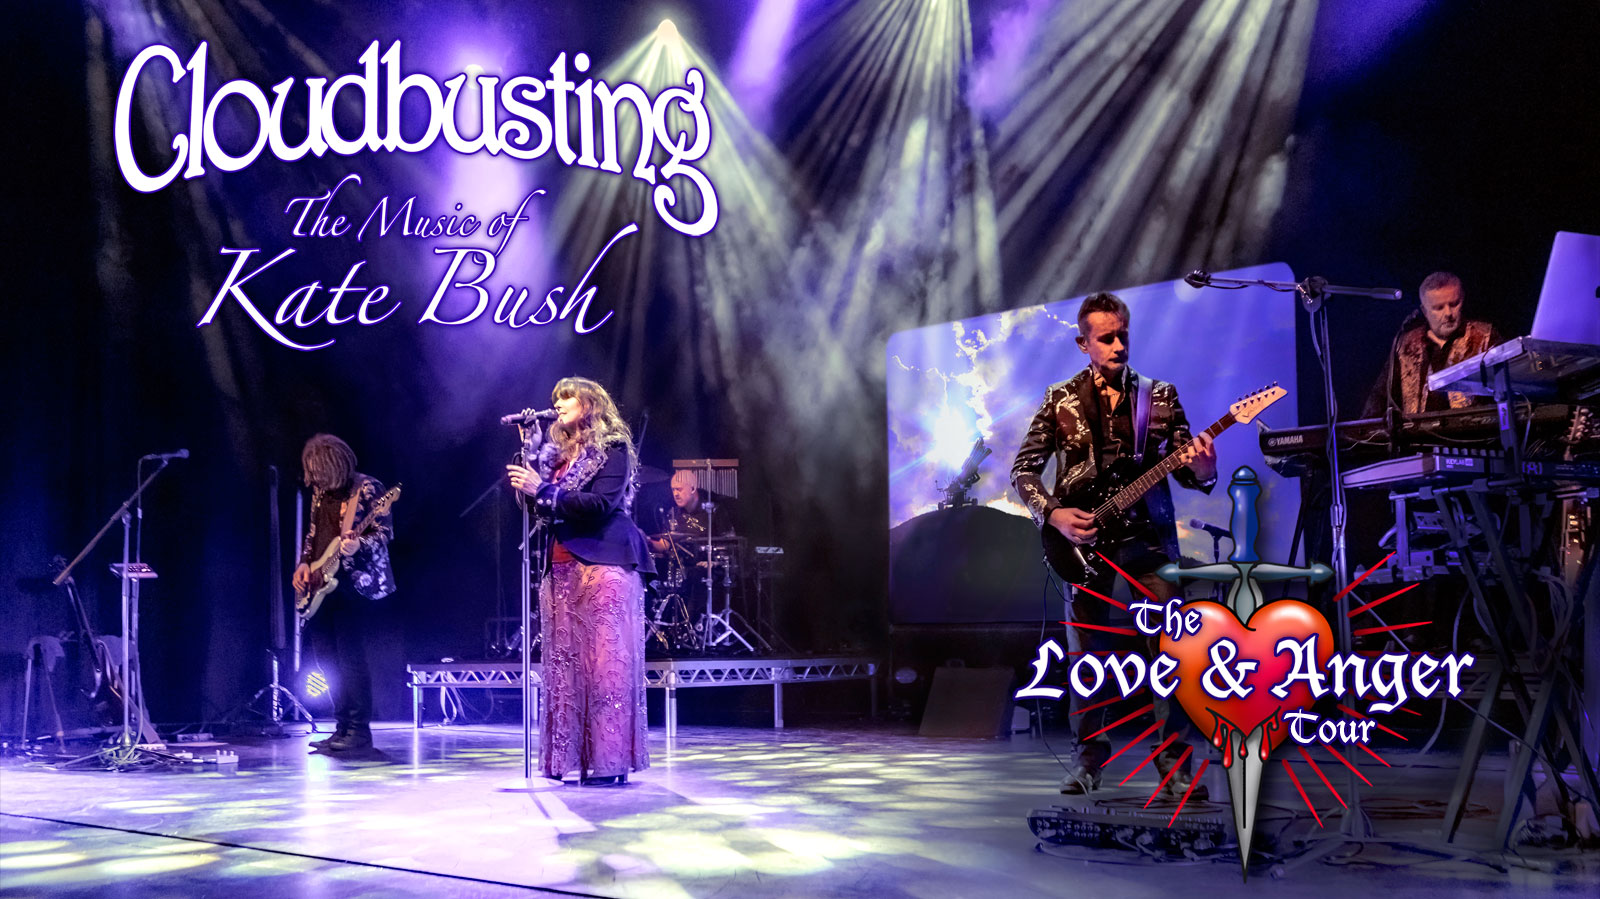 Cloudbusting – The Music of Kate Bush live